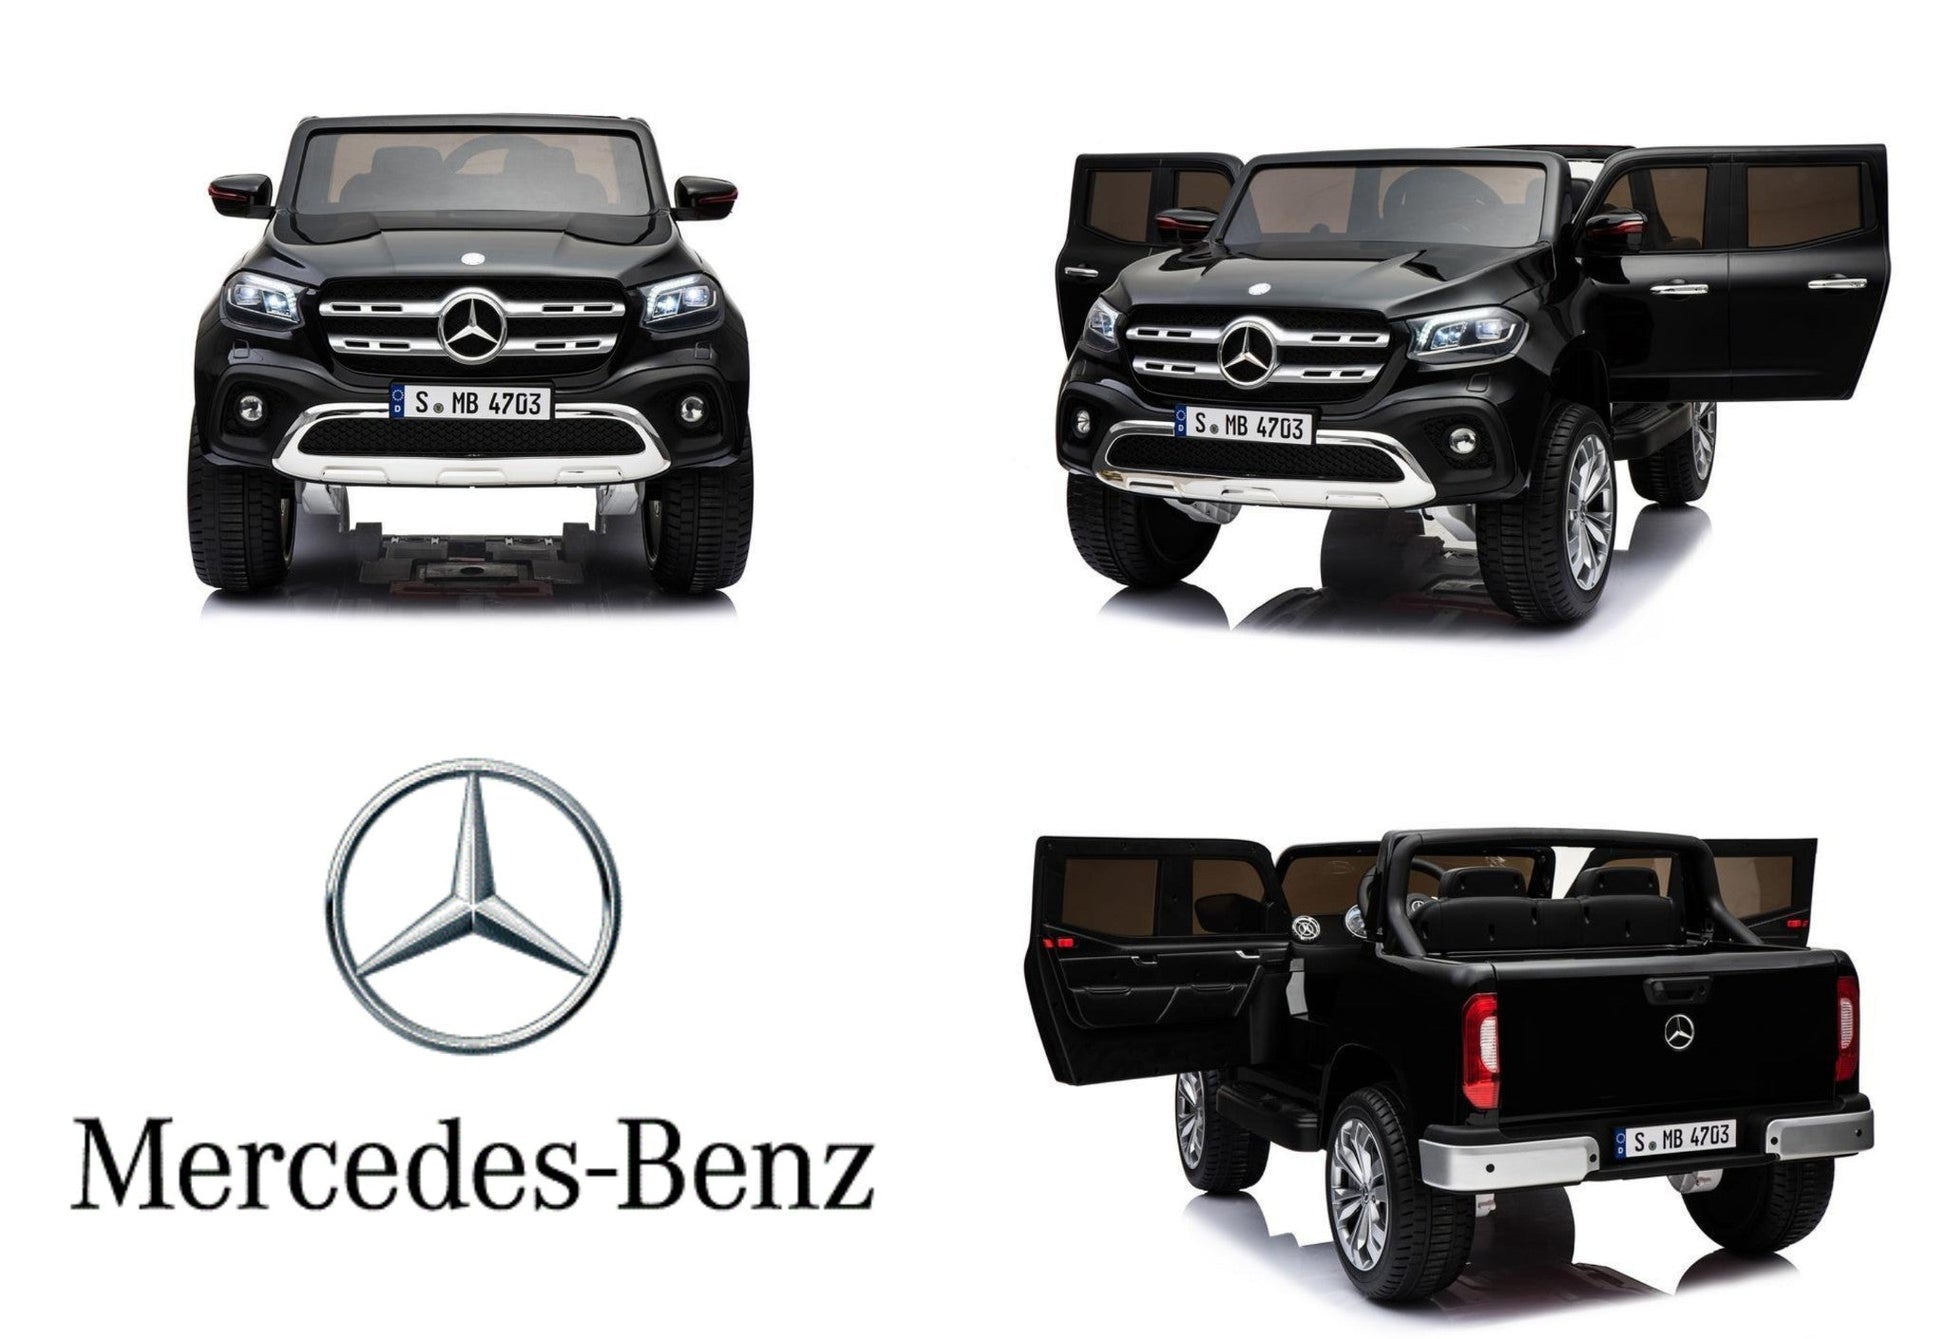 Black Mercedes X Class Pickup Electric Ride for kids in various angles